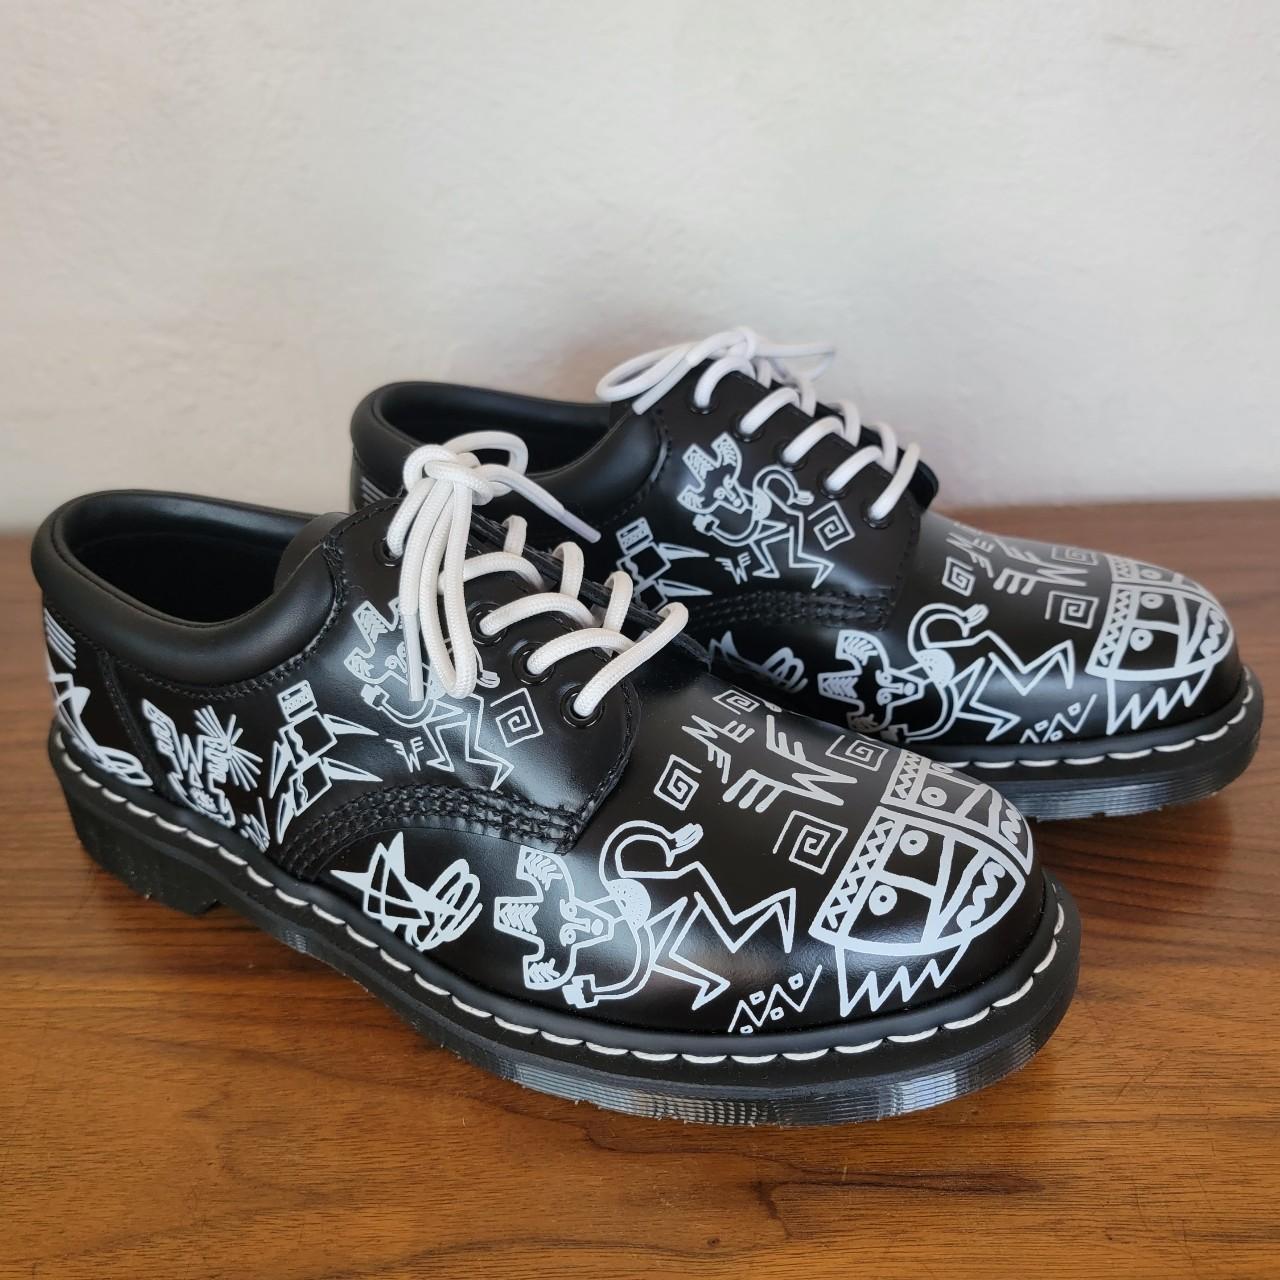 Dr. Martens Oxford Shoes. Limited edition Mark Wigan